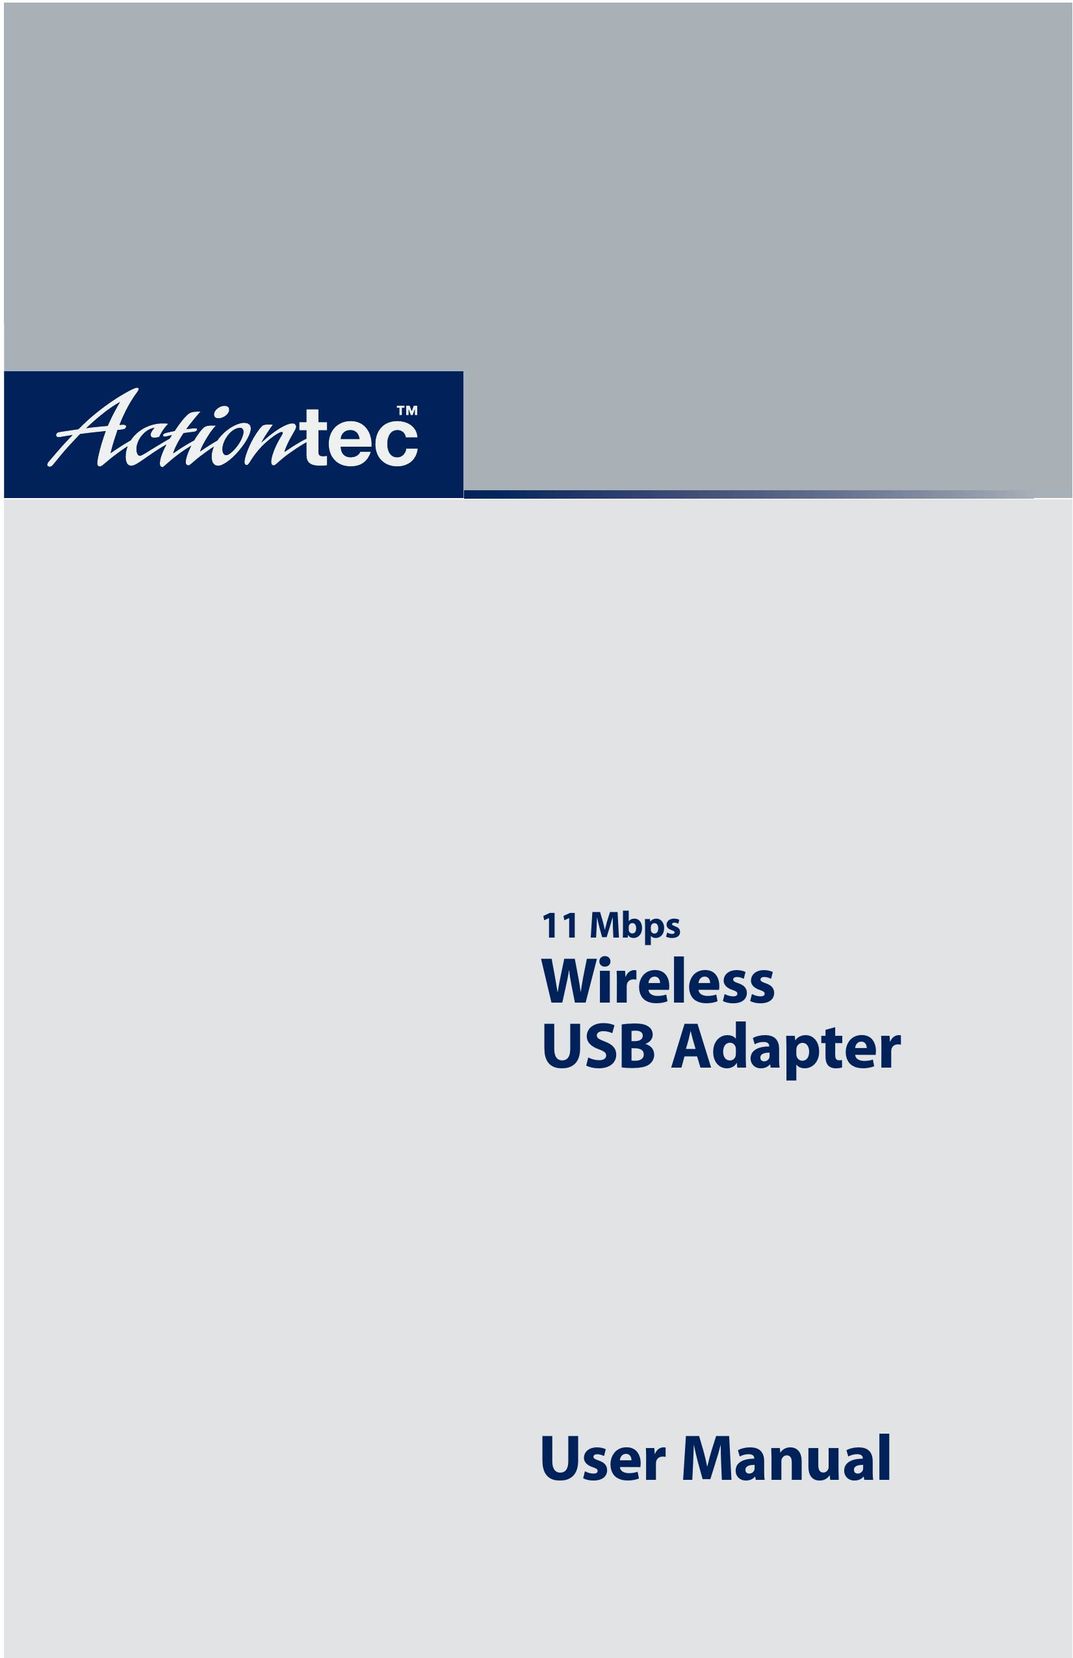 Actiontec electronic 11 Mbps Network Router User Manual